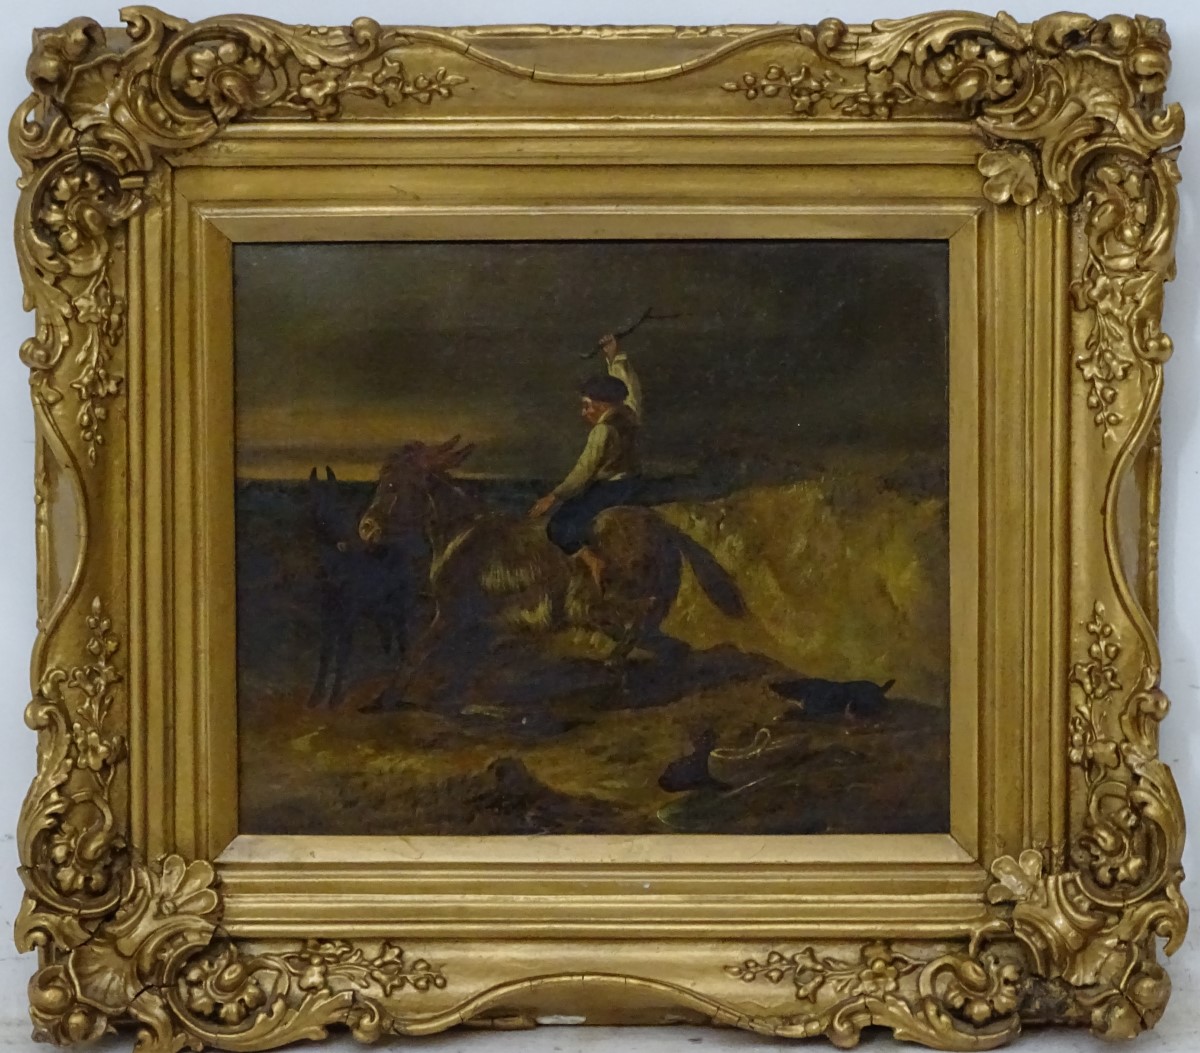 R A Bell (1815-1885) ?, Oil on canvas, The stubborn Donkey, Signed lower left. - Image 6 of 12